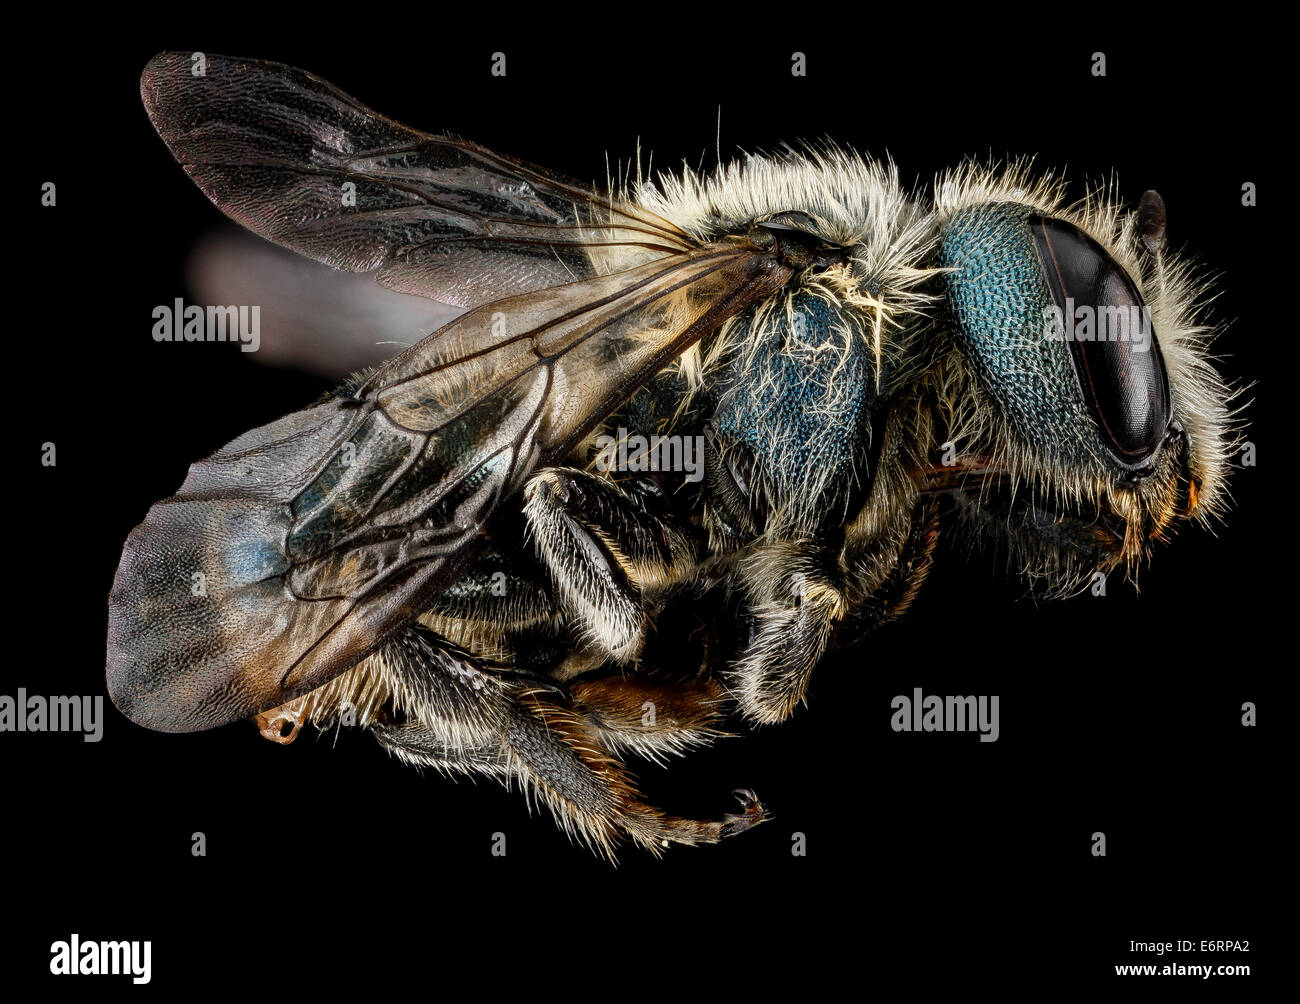 Osmia sandersoneae, F, side, Tennessee, Blount County 2013-02-01-154651 ZS PMax 8446637135 o Great Smoky Mountains National Park Osmia sandersoneae, F, side, Tennessee, Blount County 2013-02-01-15.46.51 ZS PMax Stock Photo